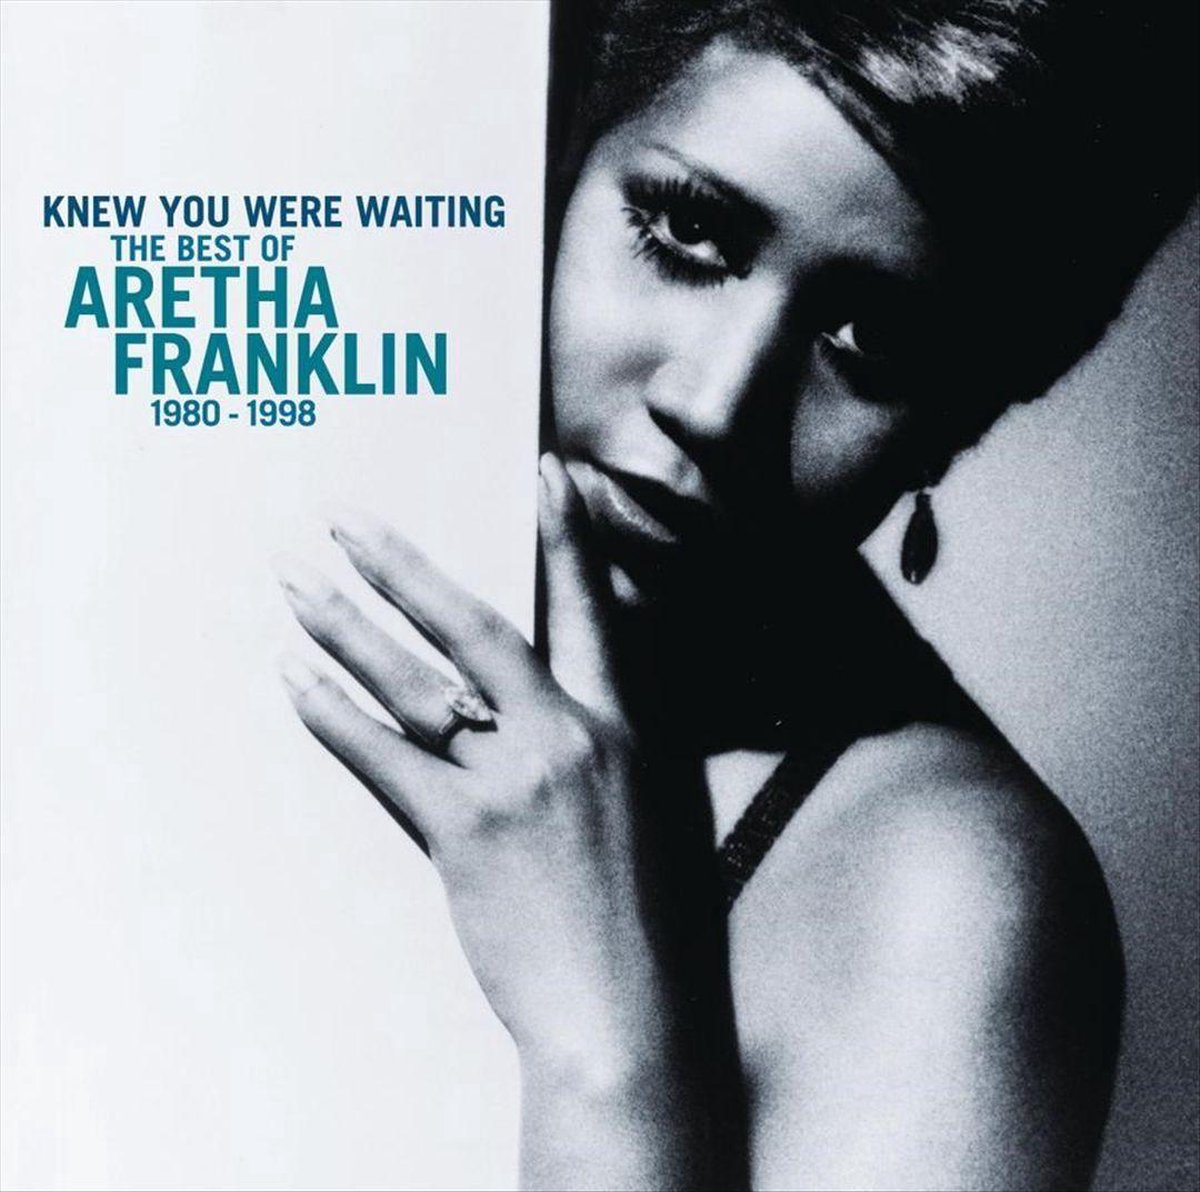 Aretha Franklin - Knew You Were Waiting – The Best Of Aretha Franklin 1980-1998